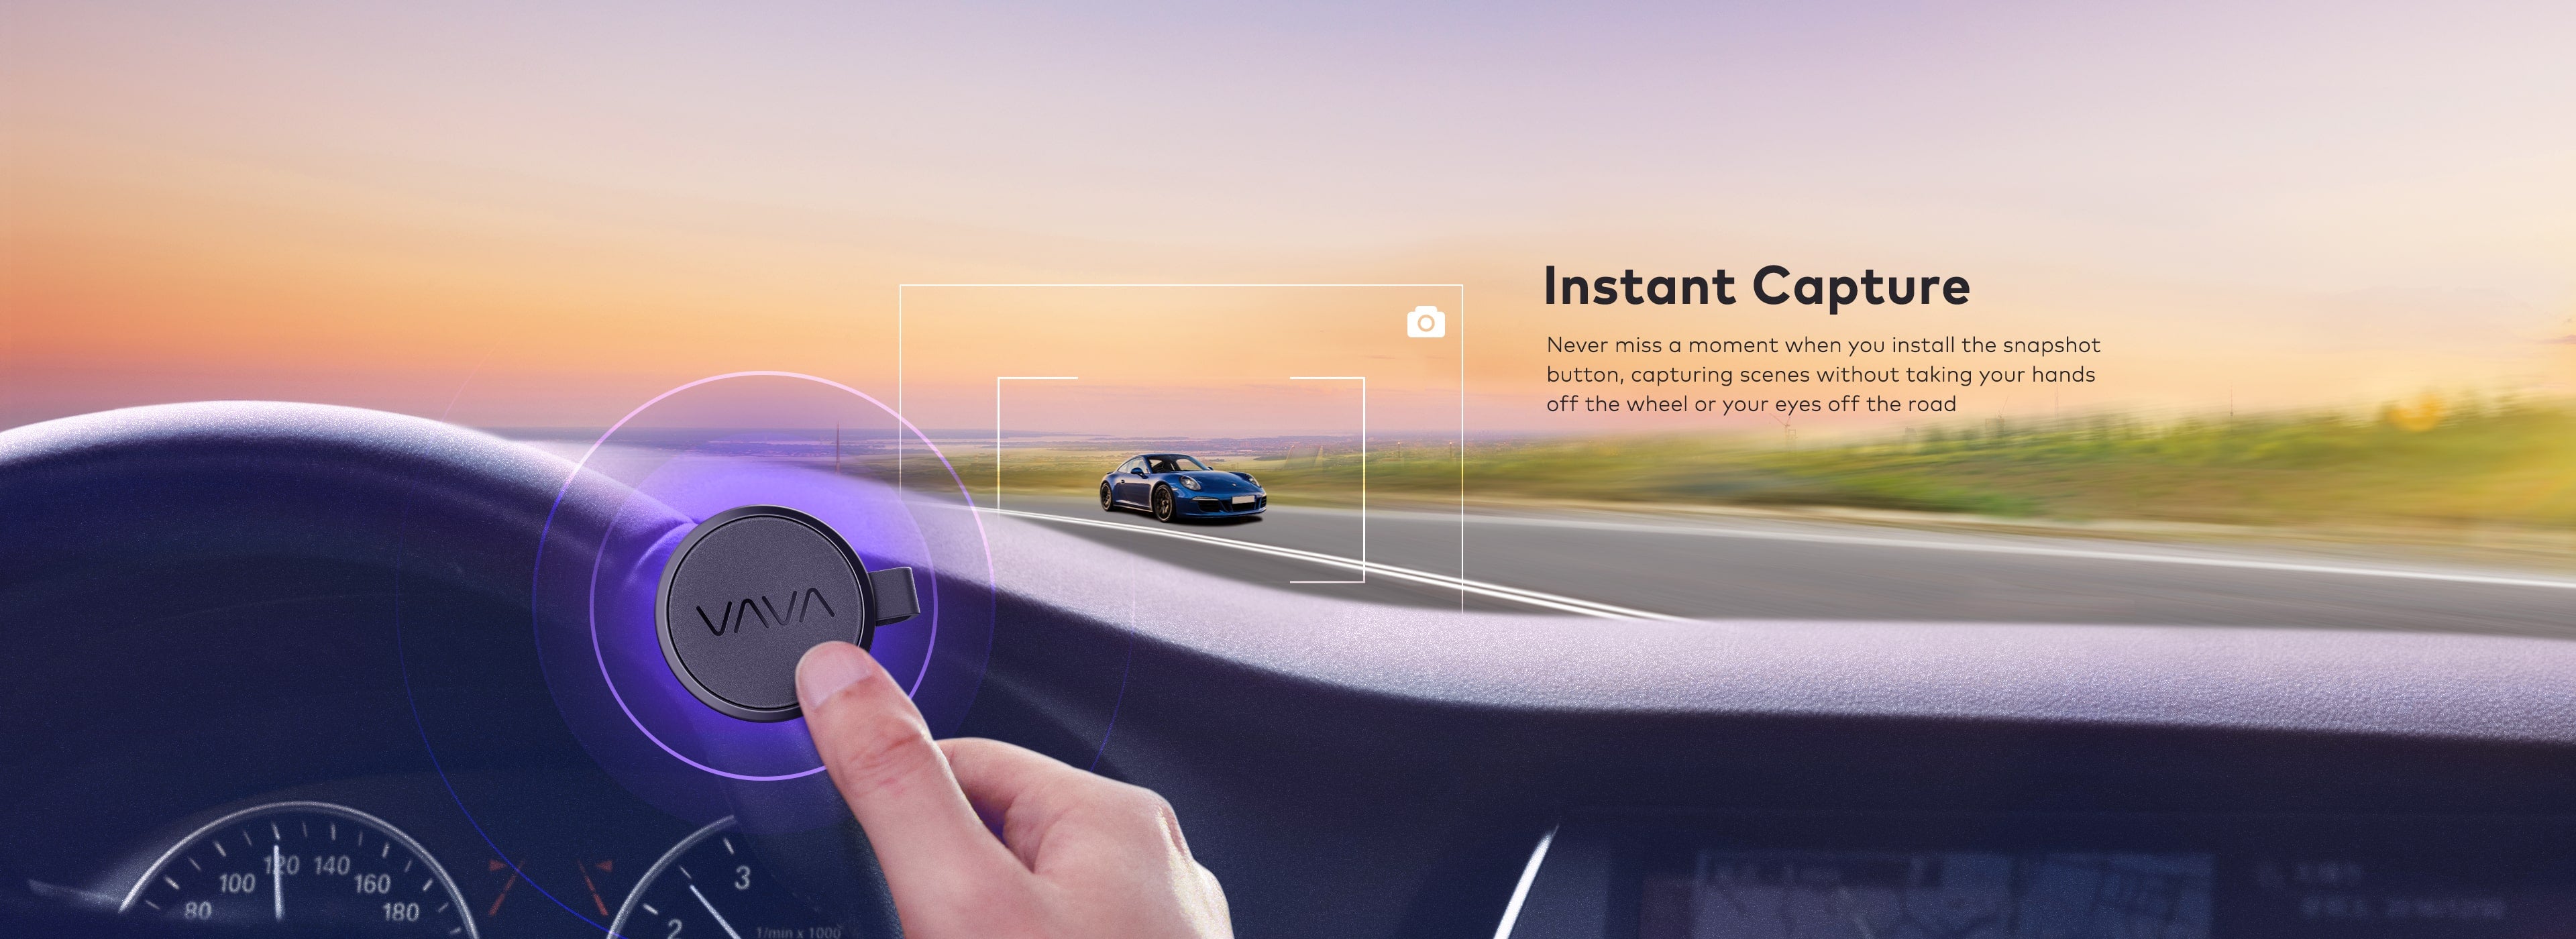 The VAVA dash cam snapshot button installed on a steering wheel so the driver can activate instant capture